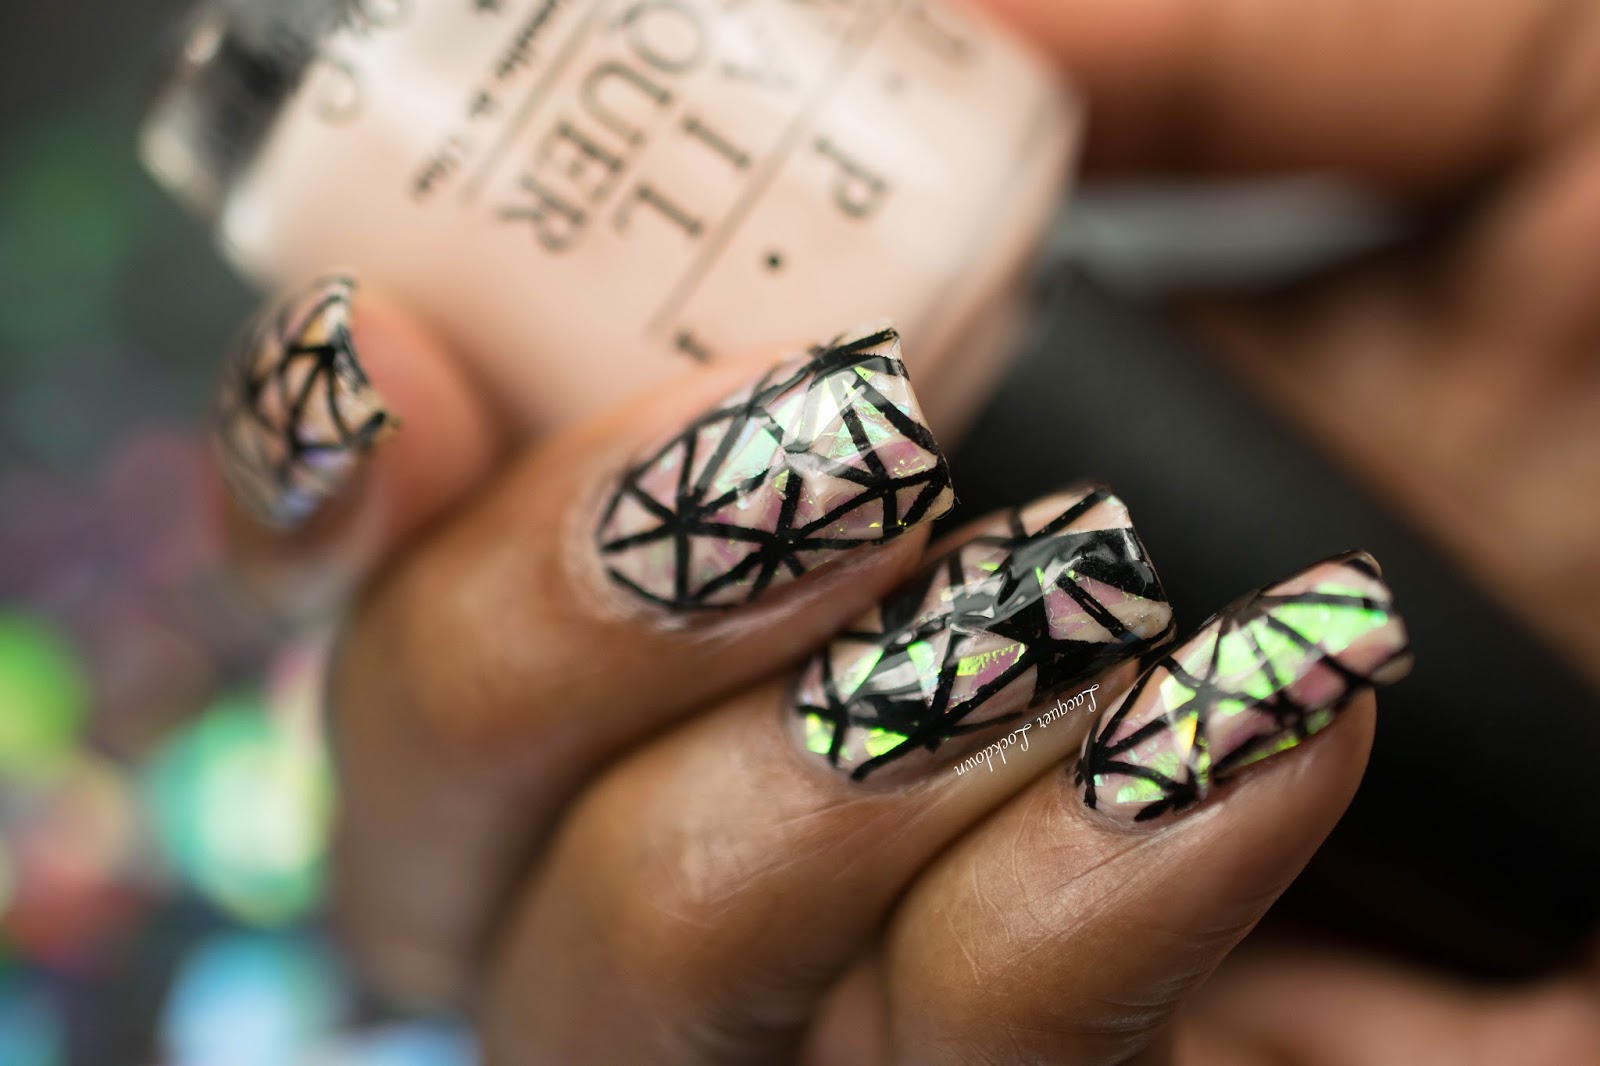 1. Glass Nail Art Designs: 20+ Ideas for a Dazzling Manicure - wide 4